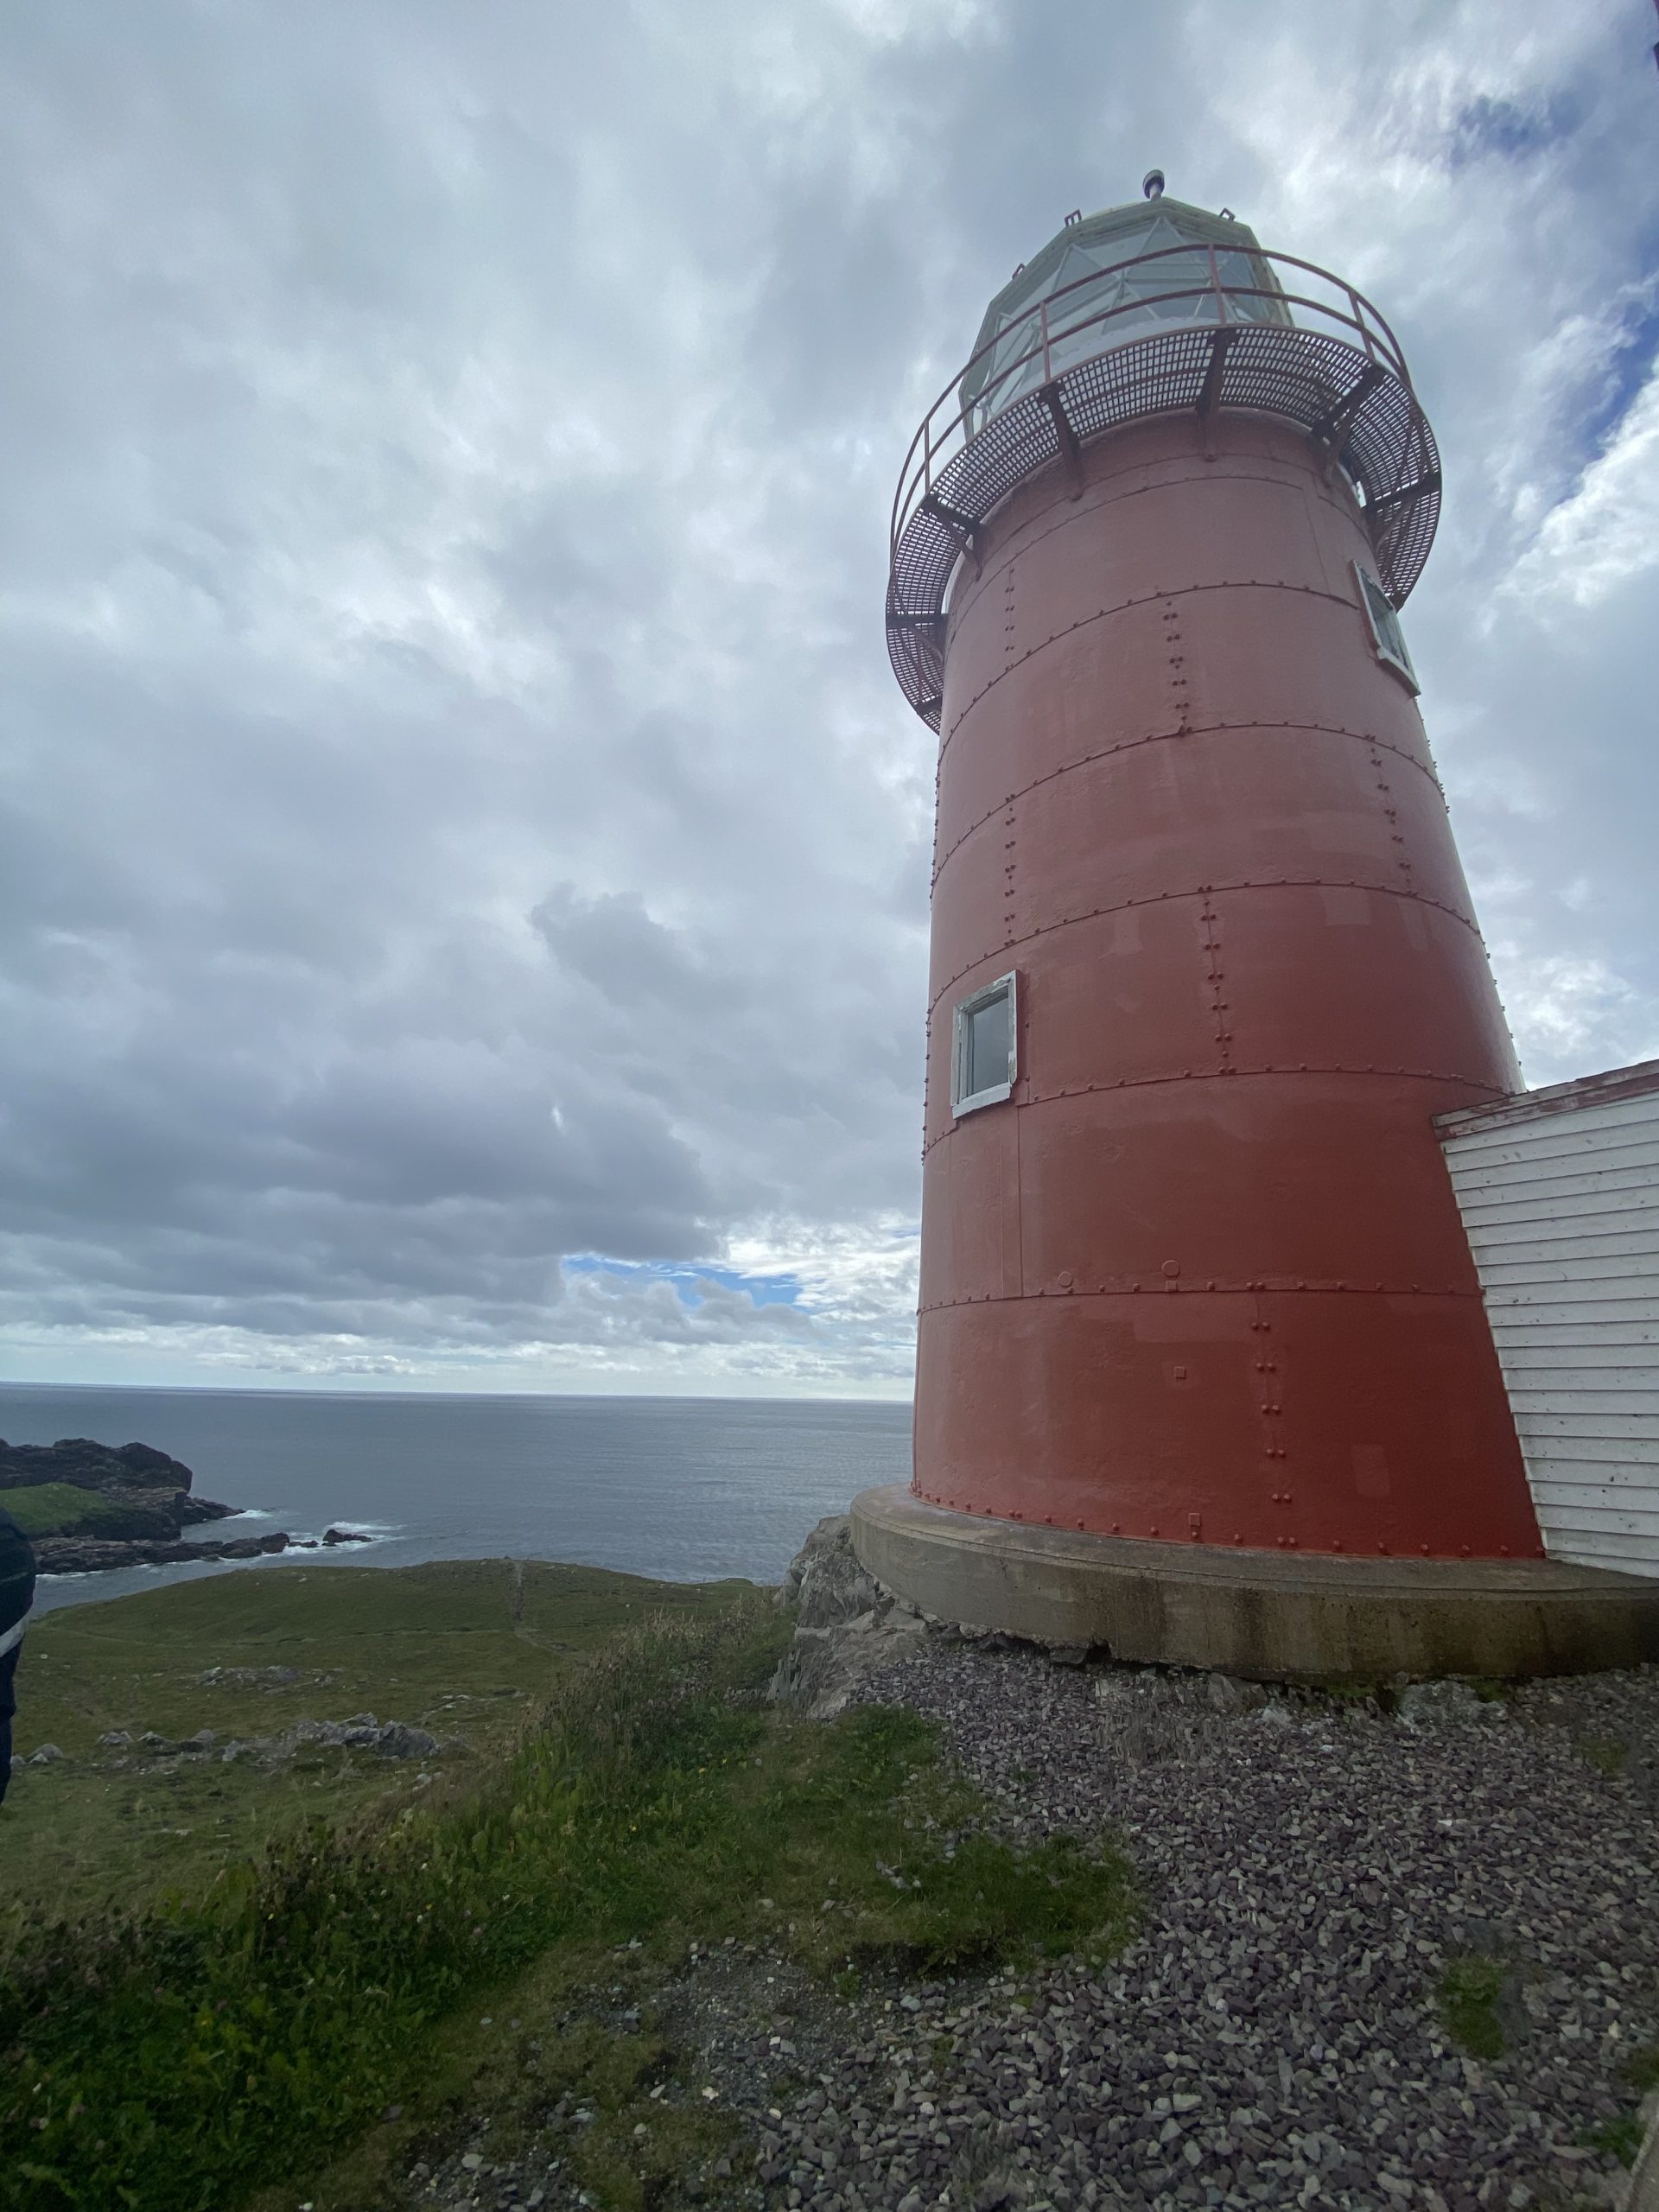 The Ferryland lighthouse in Newfoundland.